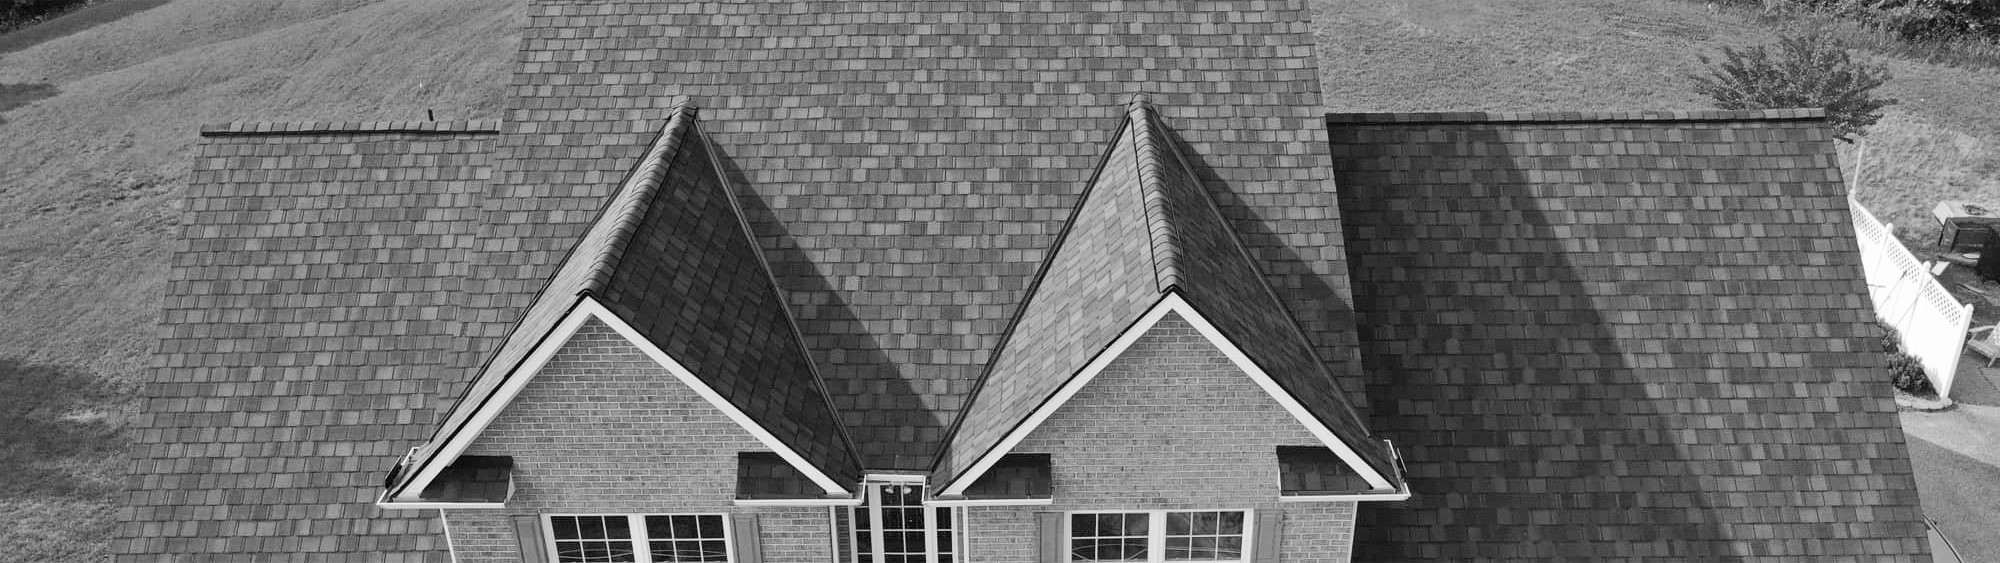 Centerville Residential Roofing Company